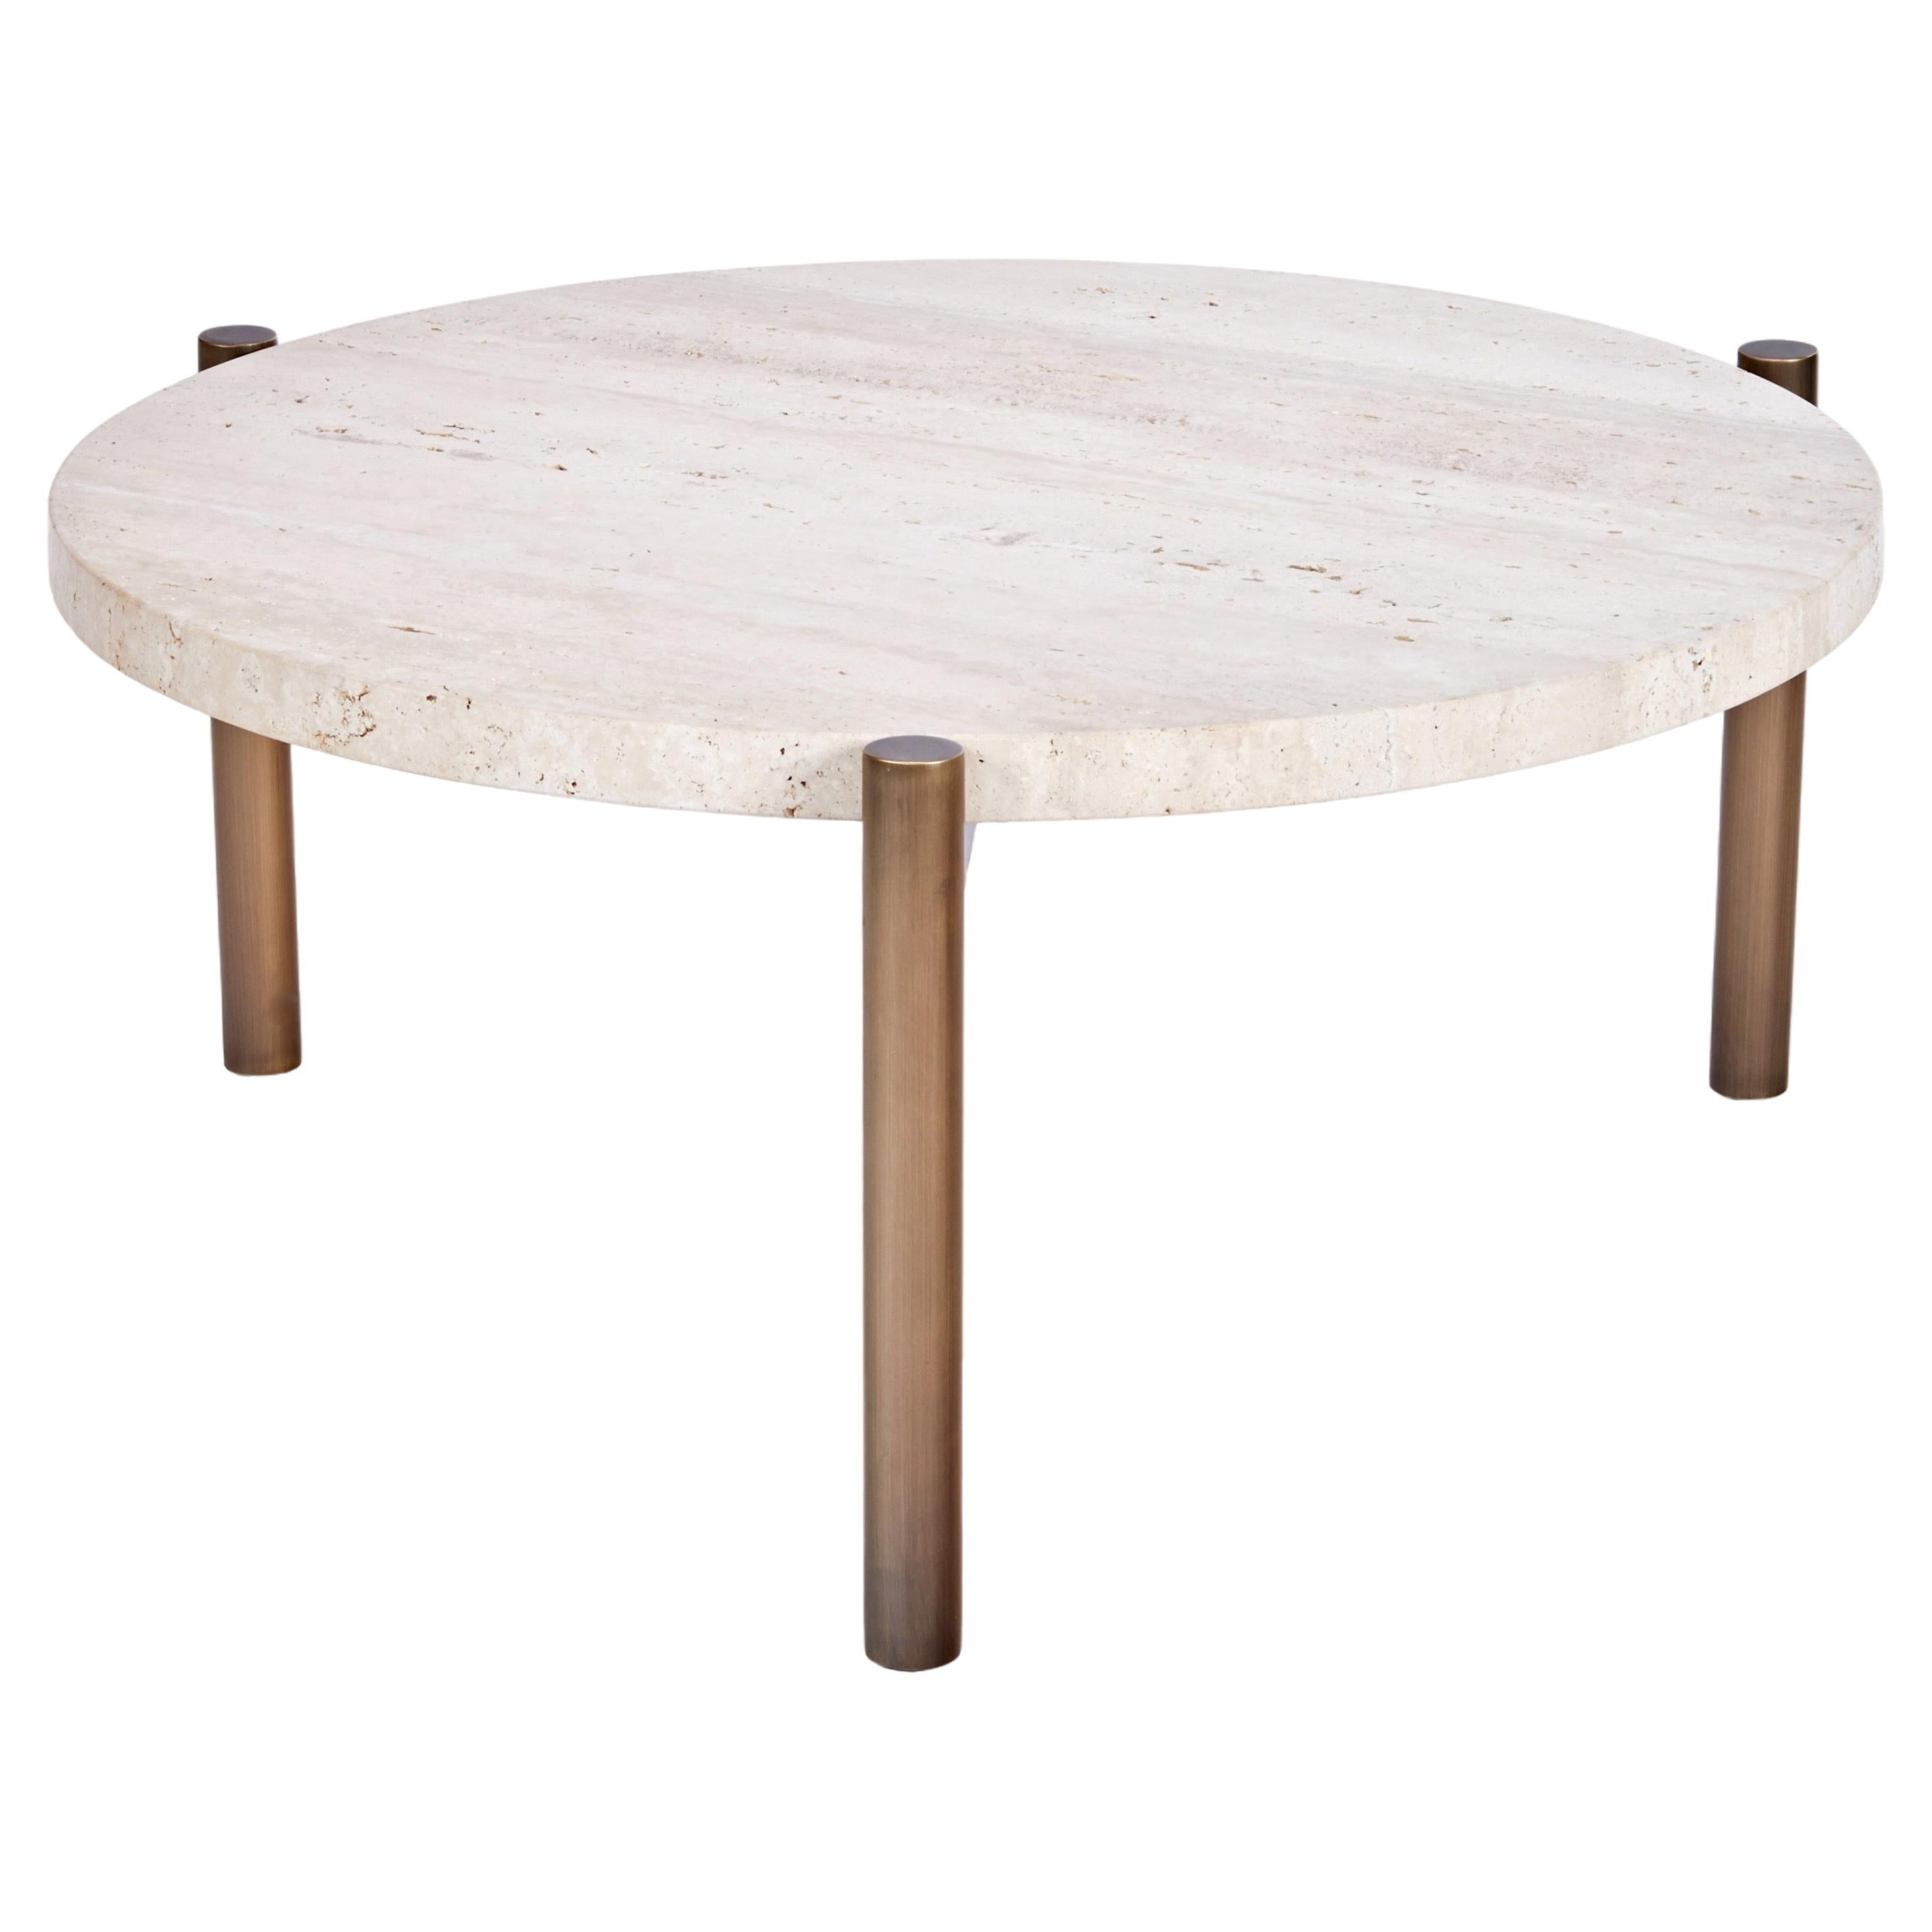 Tivoli Side Table Round 26"D 3 Legs Burnished Brass Plated Base + Travertine Top For Sale